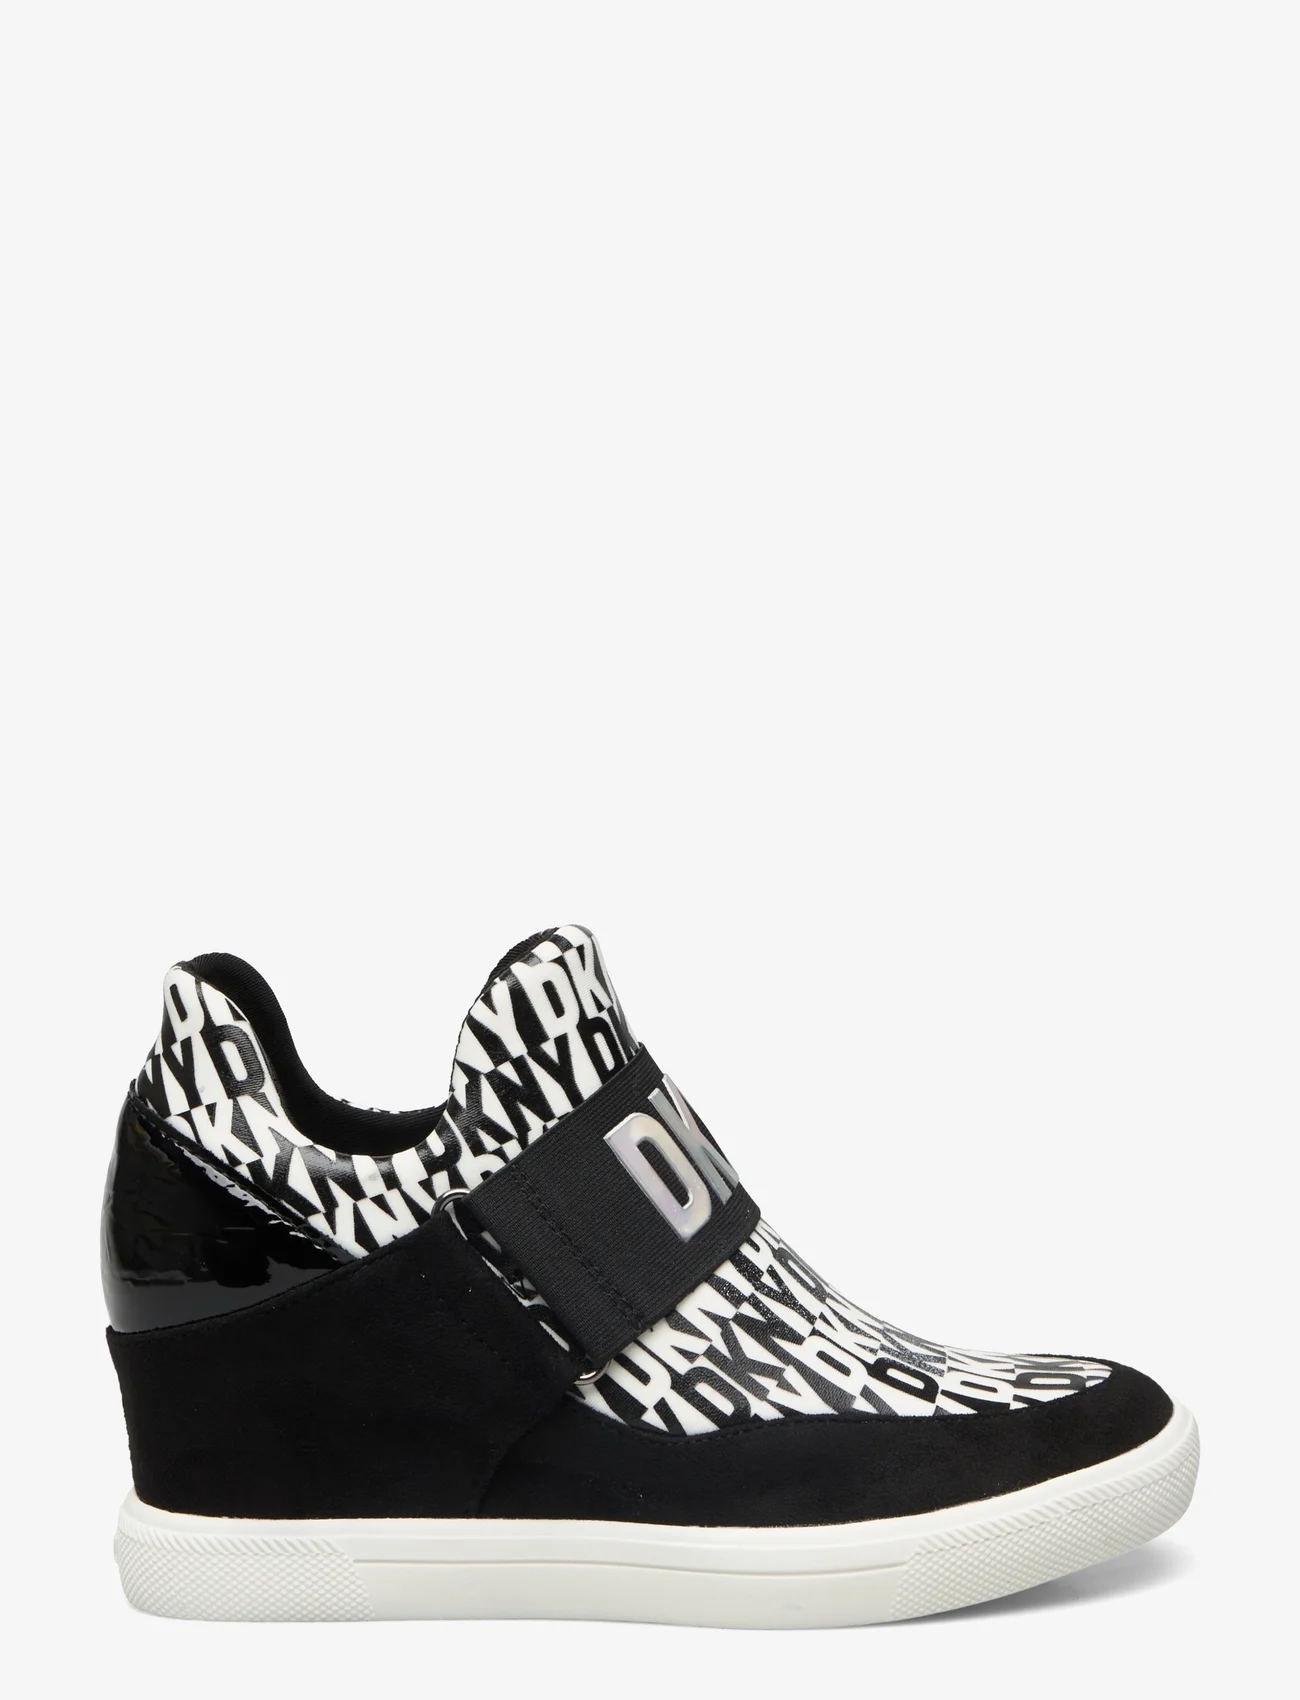 DKNY - COSMOS - lave sneakers - black/white - 1